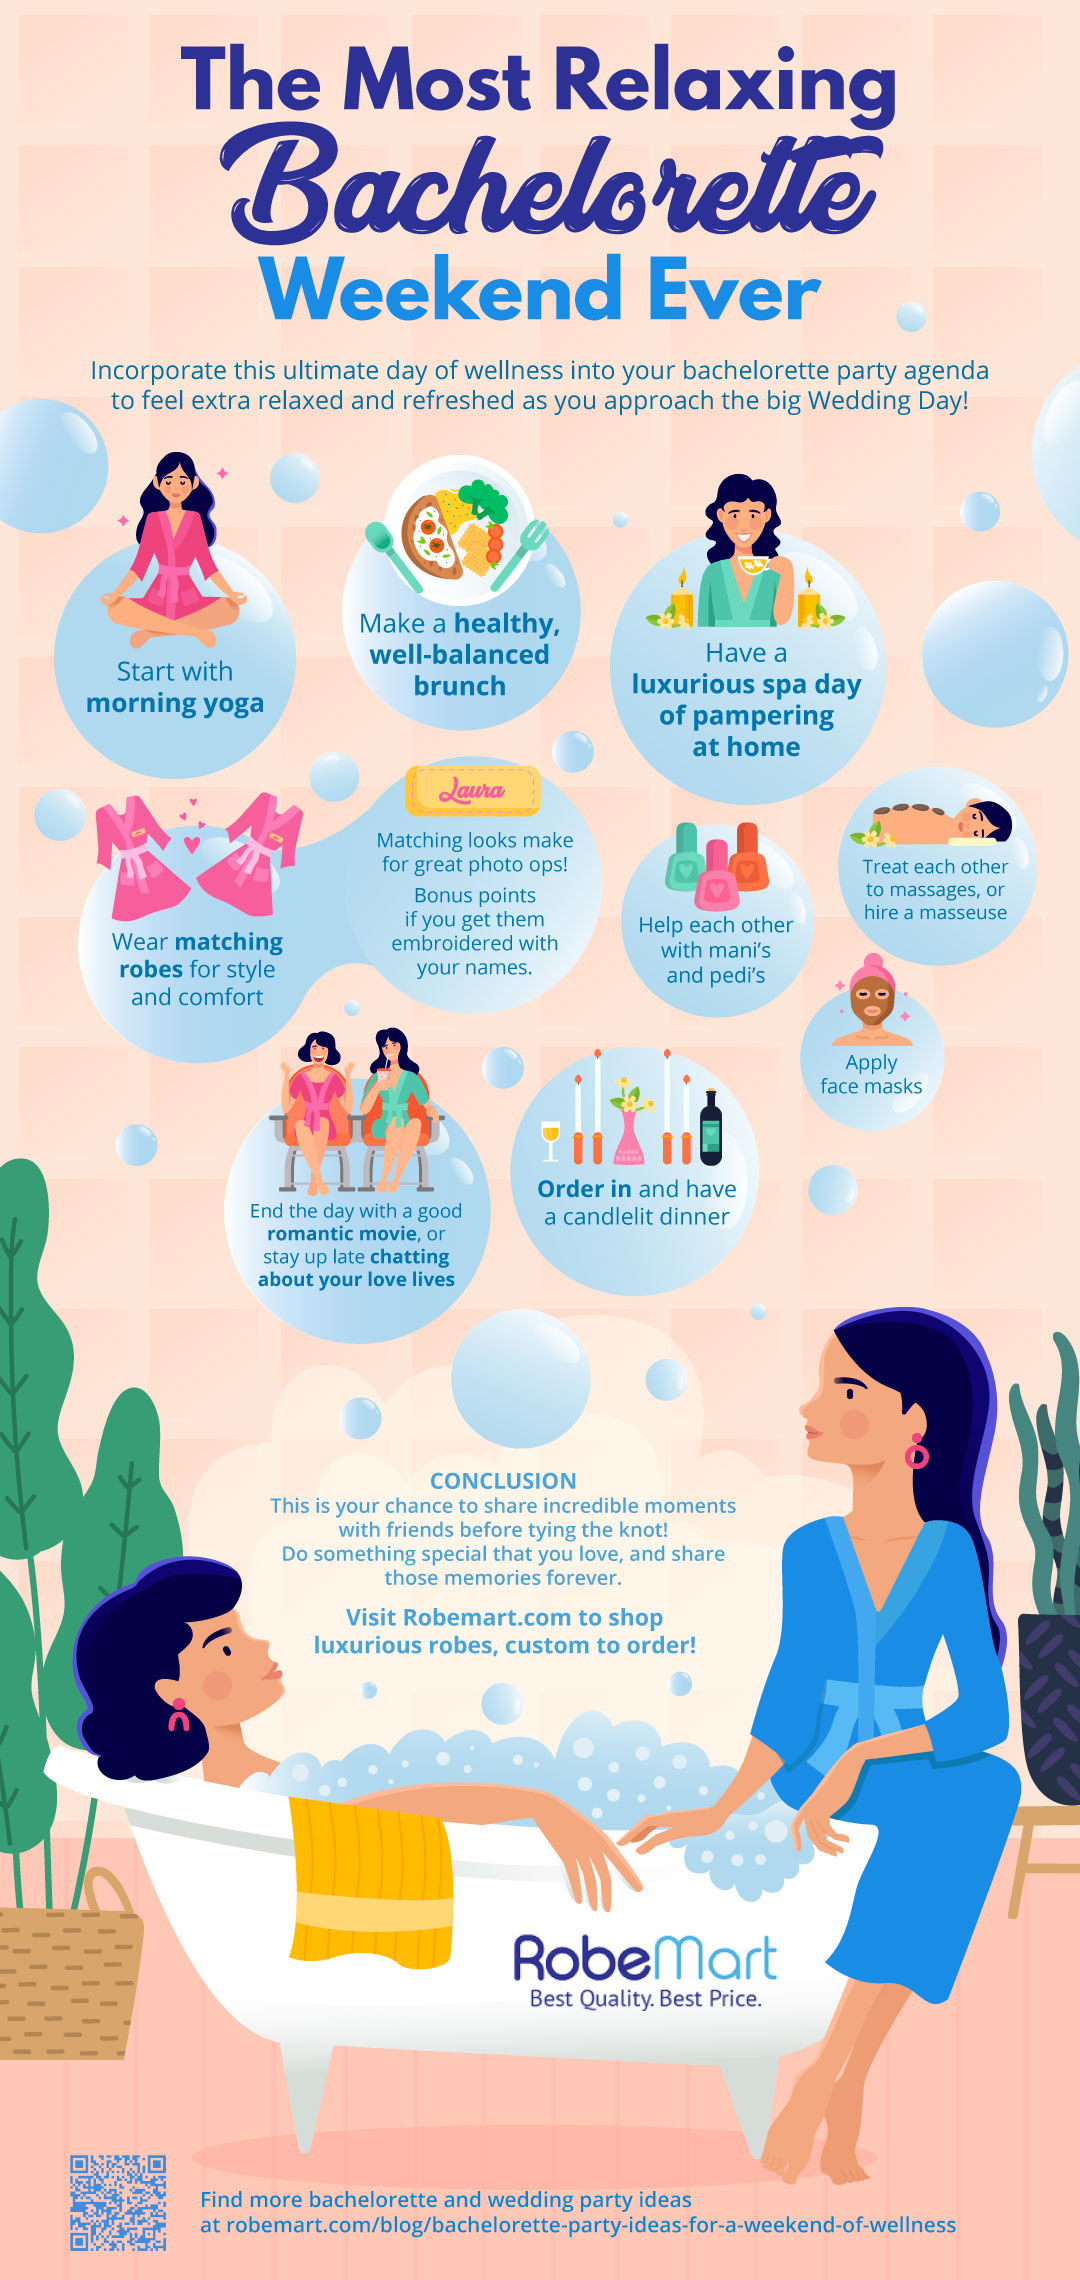 Bachelorette Party Ideas for a Weekend of Wellness [INFOGRAPHIC]